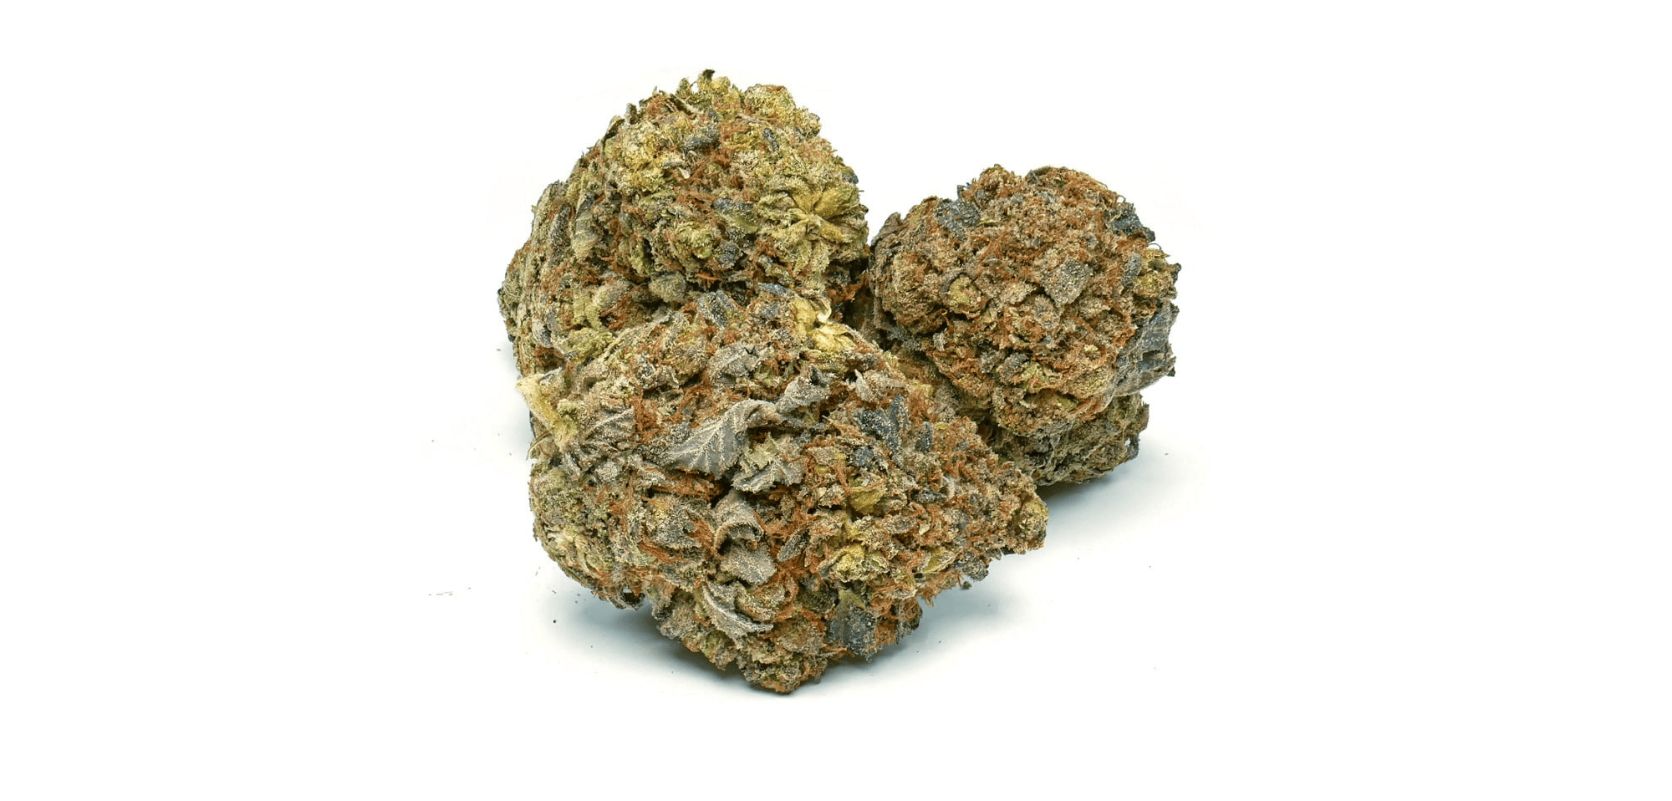 The Death Bubba strain is a legendary strain at any cannabis dispensary, for several compelling reasons.